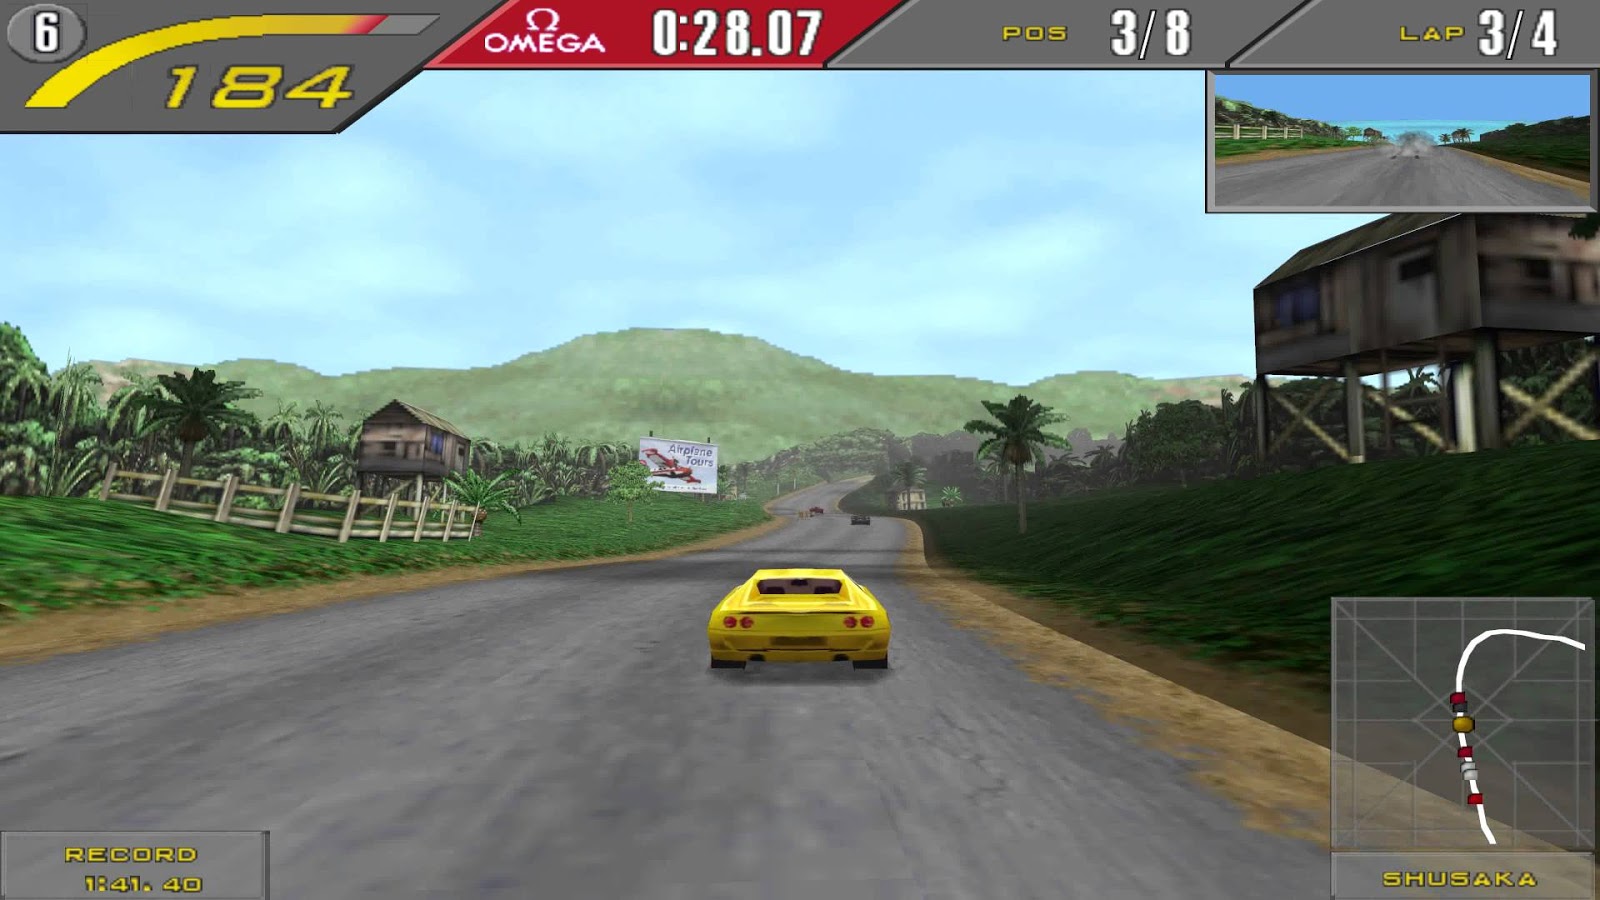 Nfs 2 mobile. Need for Speed II 1997. Need for Speed 2 se. Need for Speed se 1997. Need for Speed 2 se 1997.